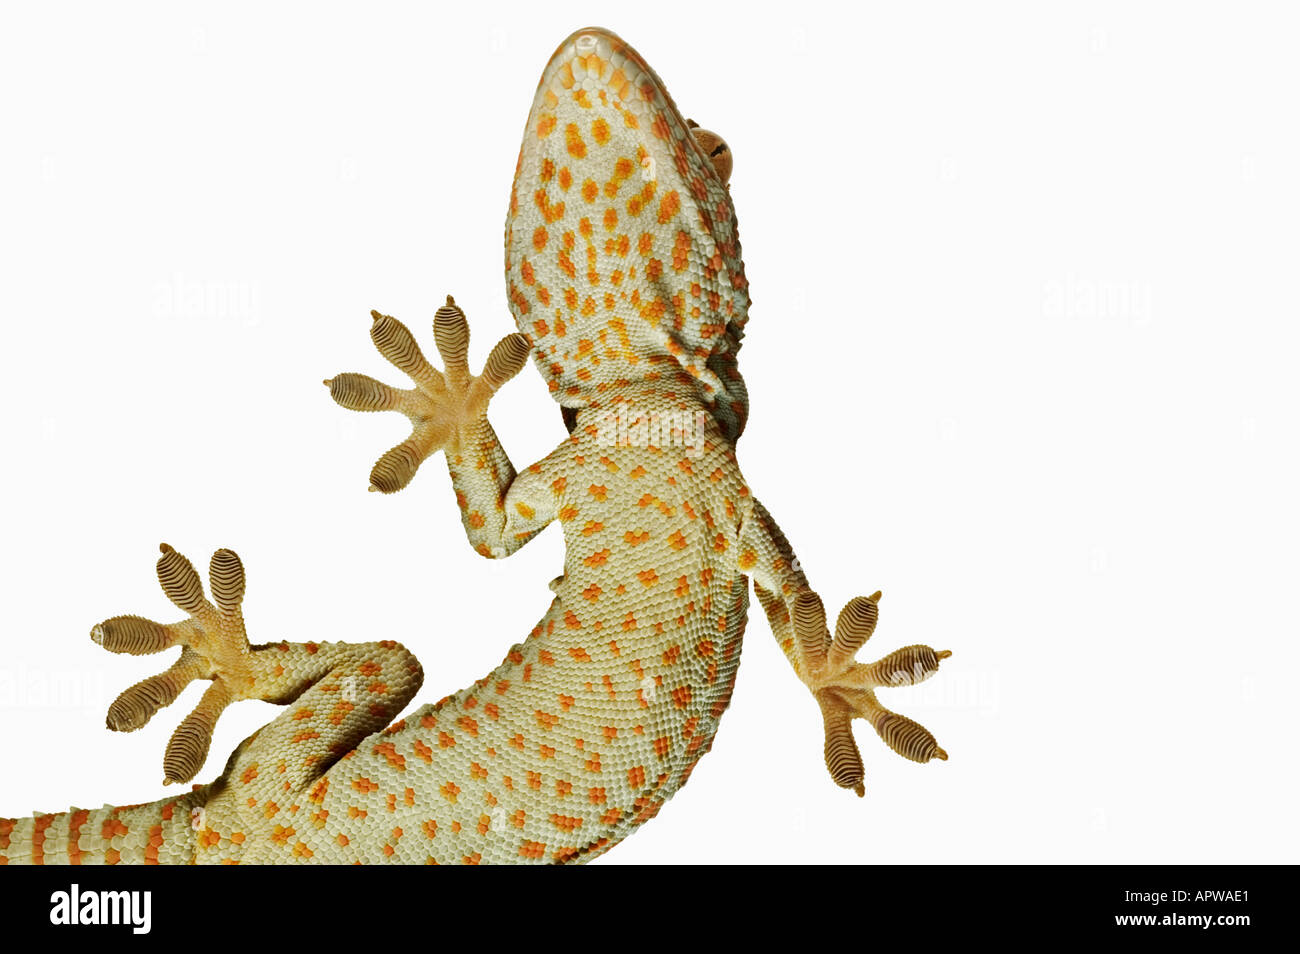 Tokay gecko Gekko gecko View from below showing specially adapted feet Dist South East Asia Stock Photo